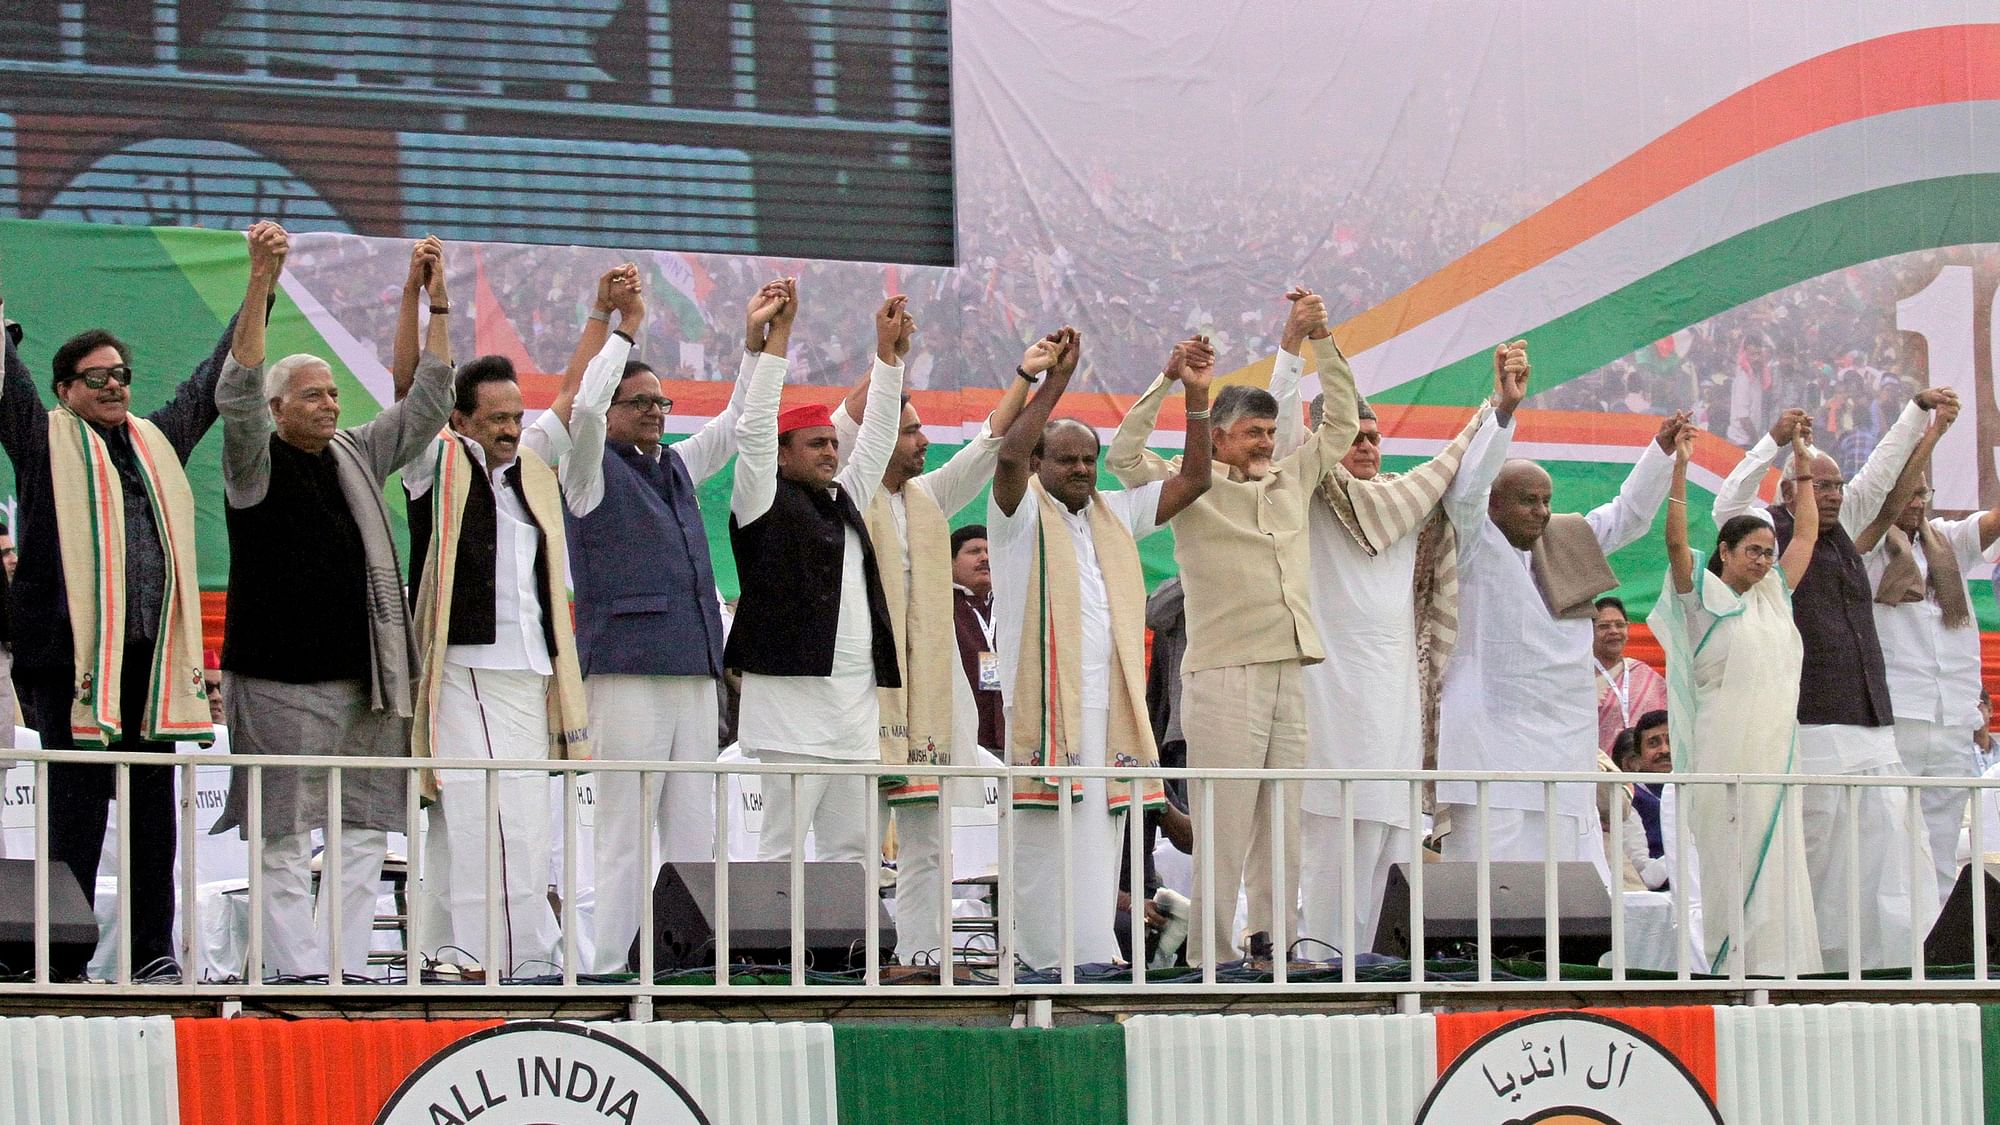 Opposition parties join hands during a public rally organized by Trinamool Congress party in Kolkata on 19 January.